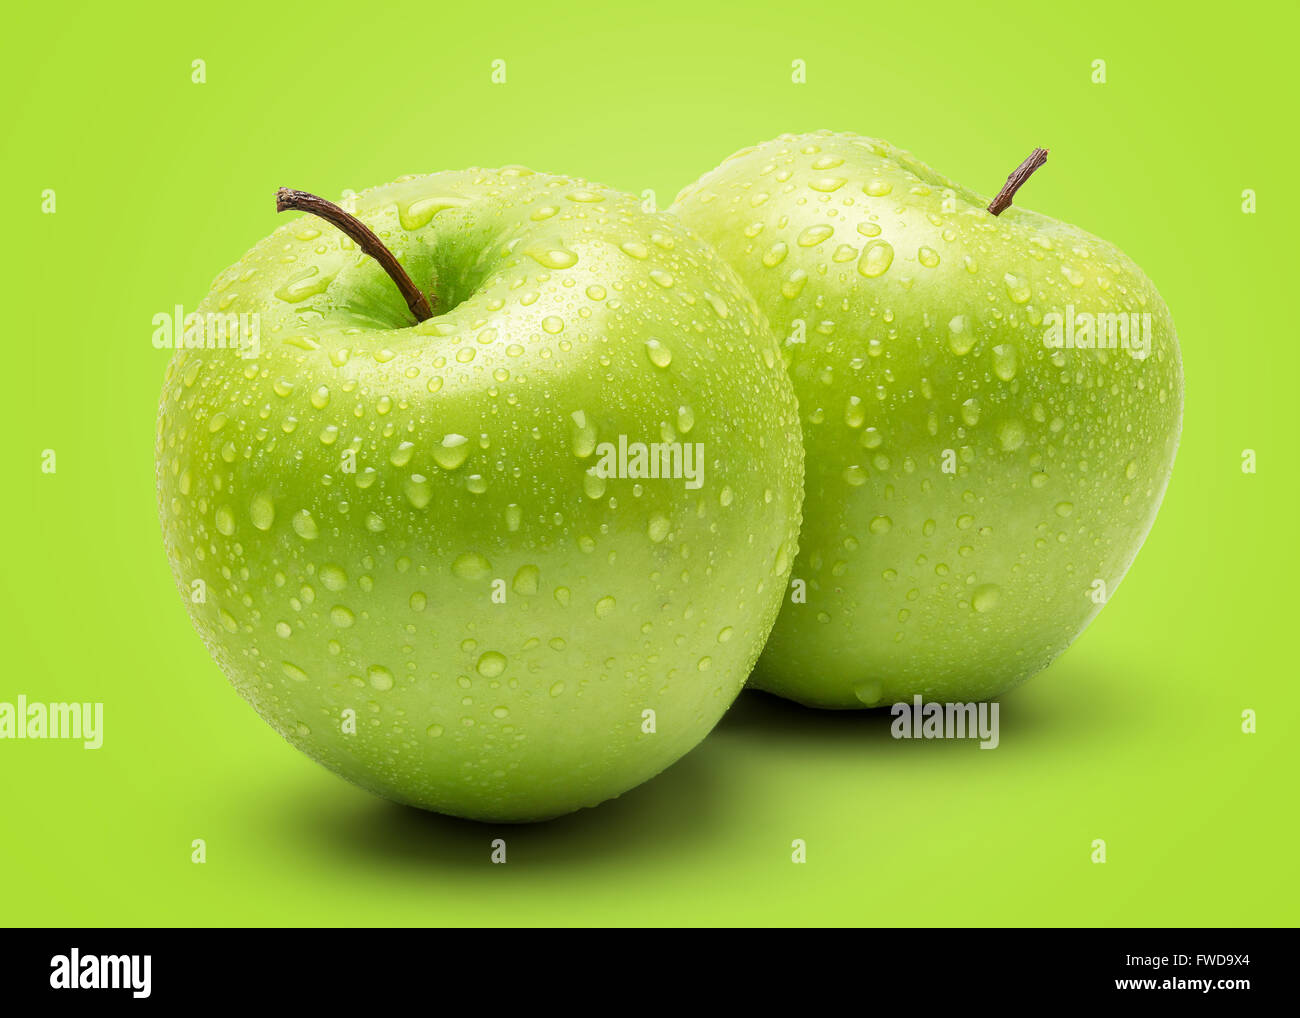 Perfect Fresh Green Apple Isolated on Green Background in Full Depth of Field. Stock Photo